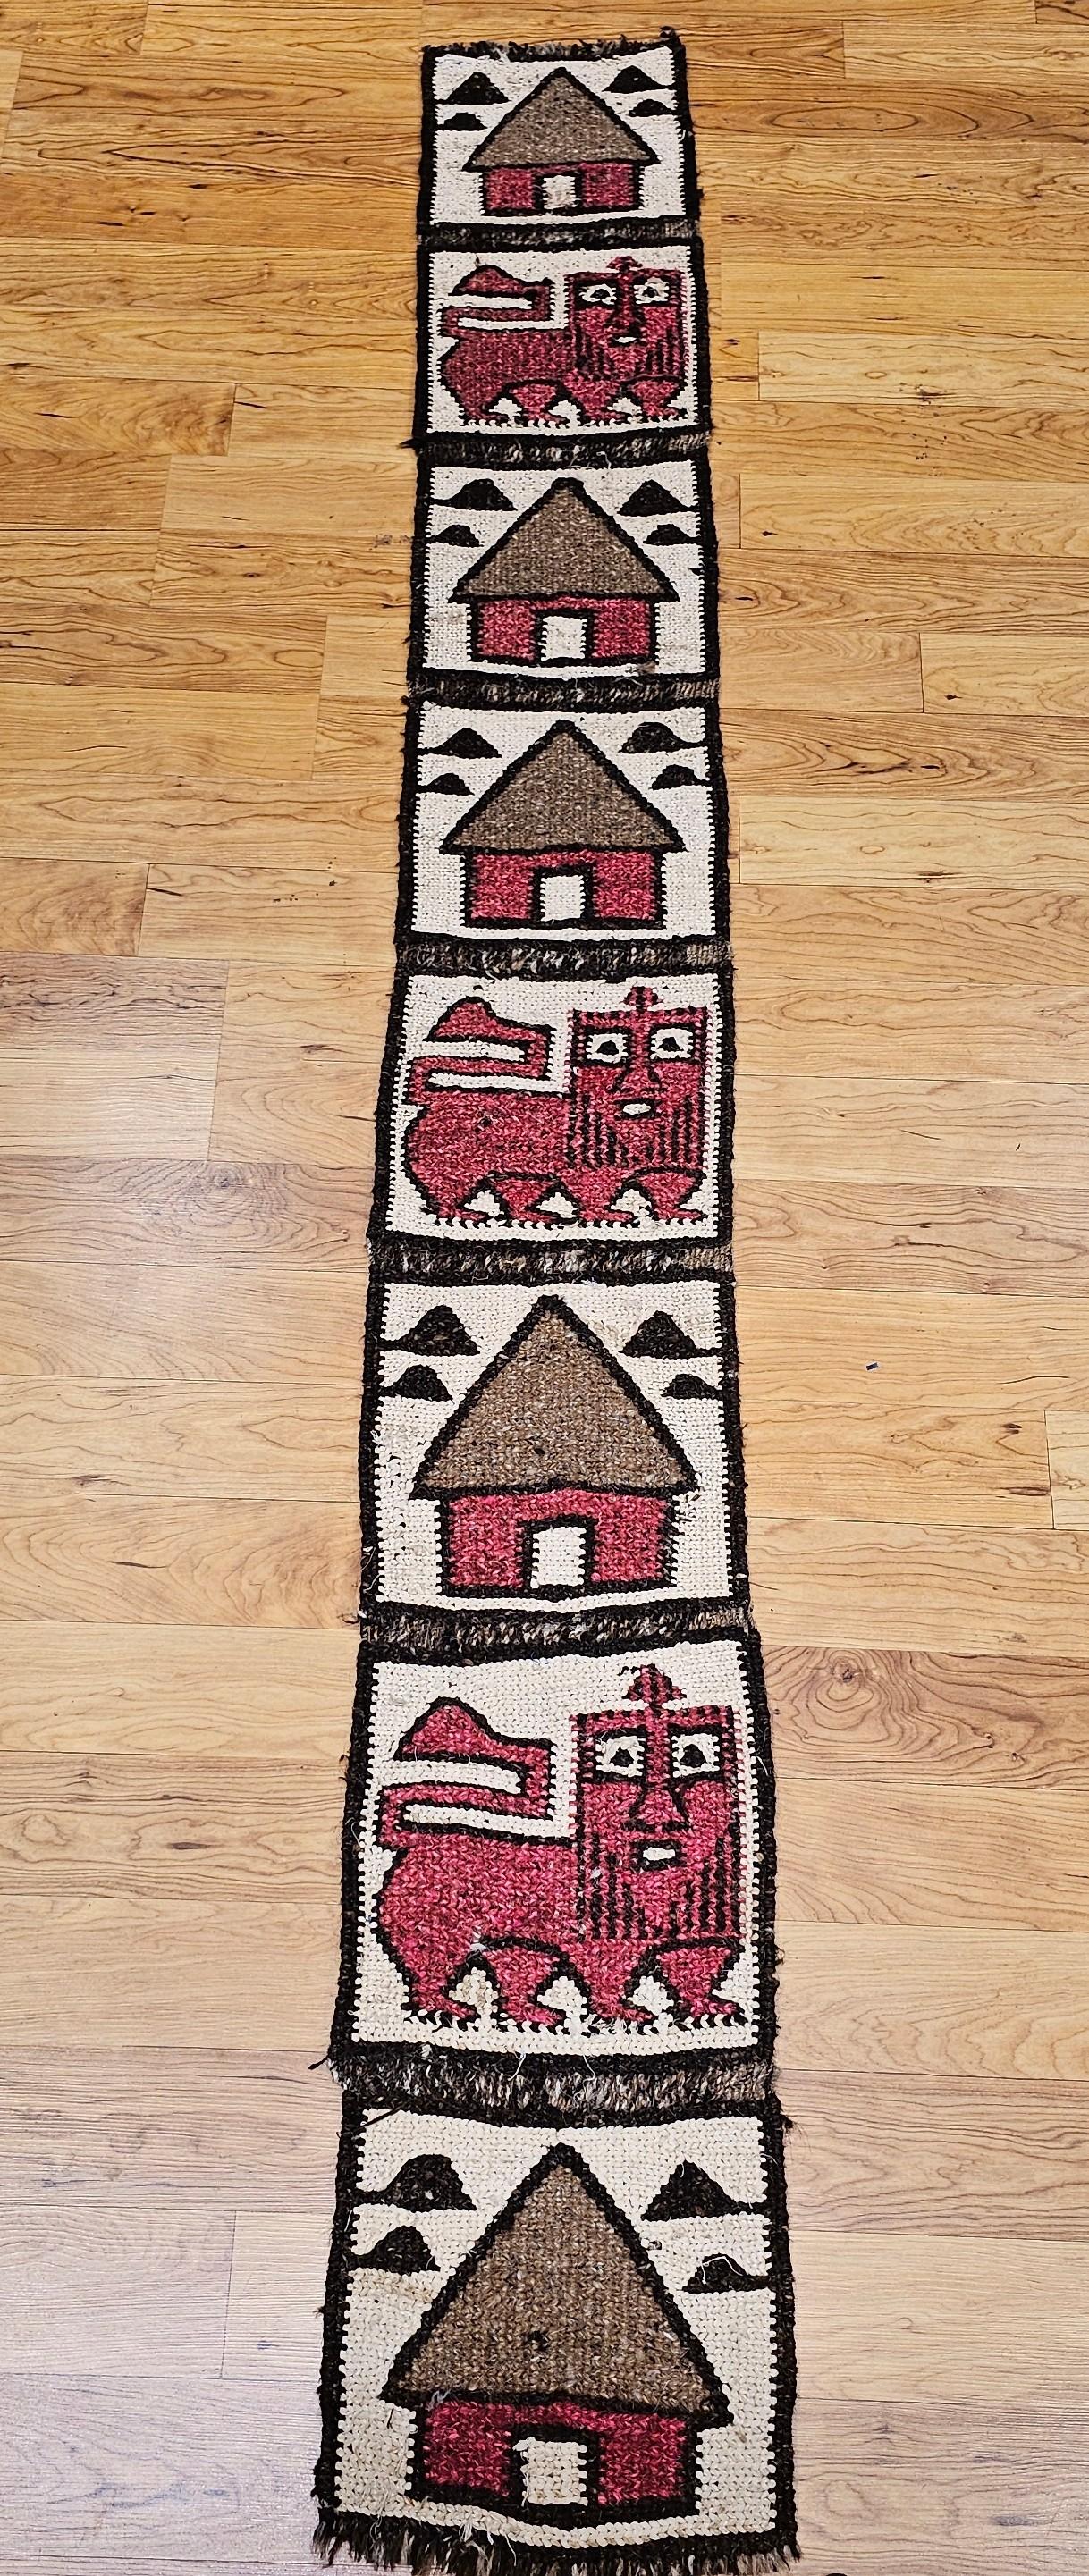 Simple and beautiful handwoven African table runner or wall hanging art depicting a series of huts and lions.  The item can be used as a table runner or hung as a primitive wall art.  It can also be divided into two sections and mounted and used as